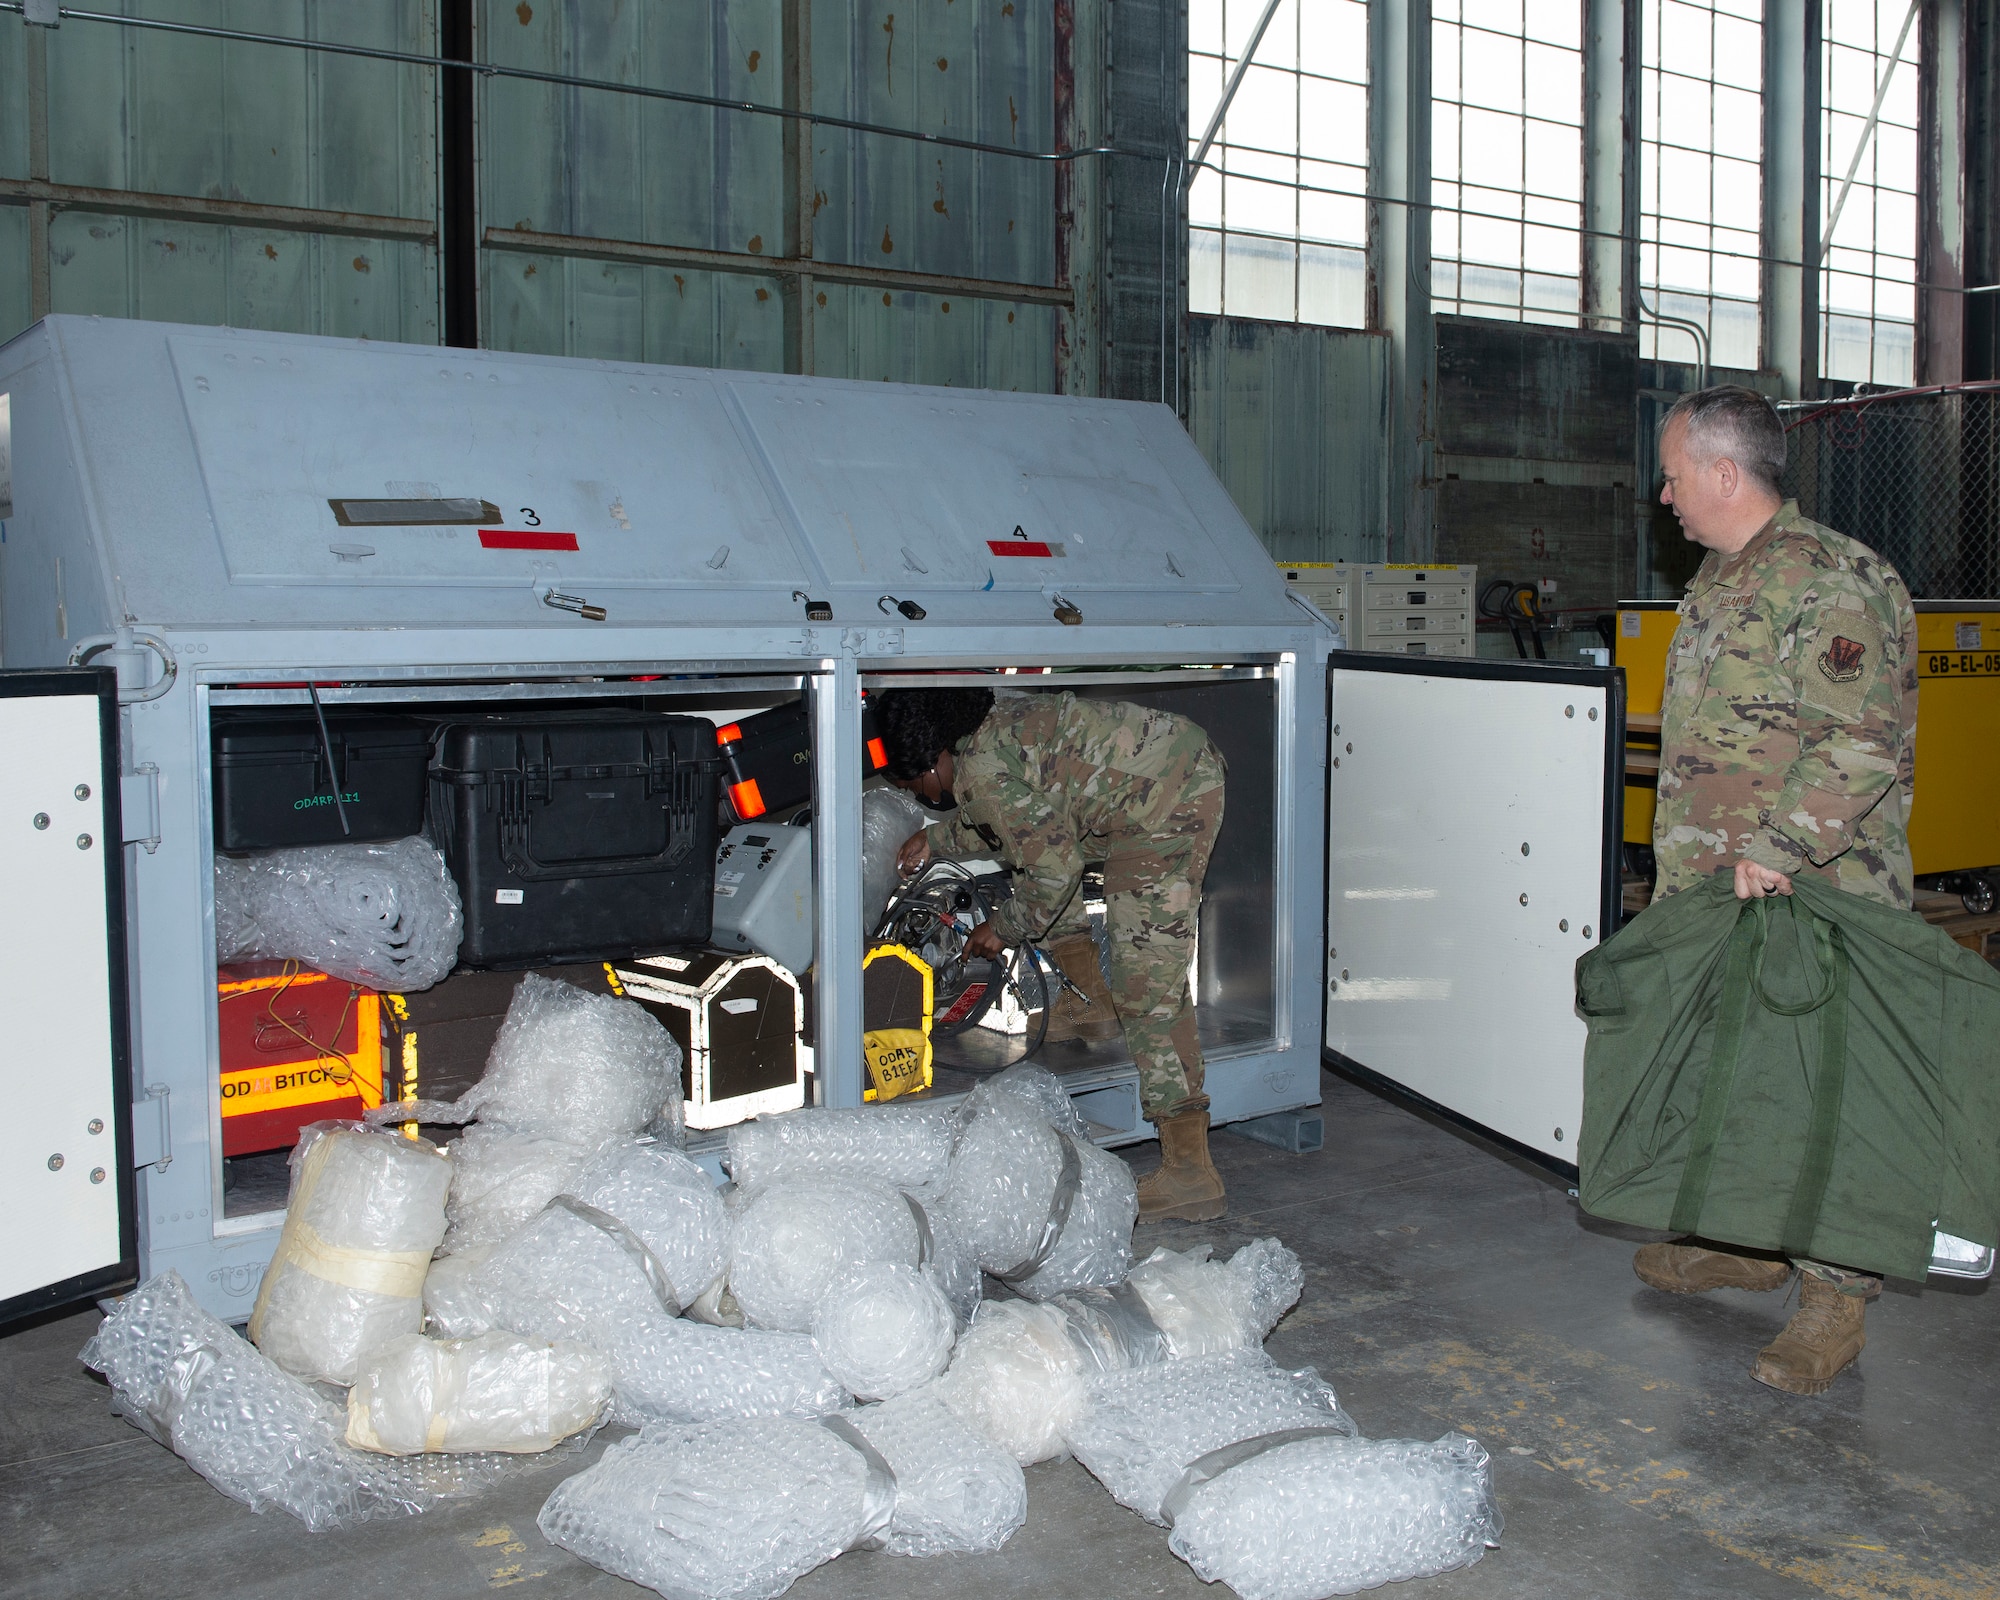 large metal box; with doors open; equipment being packed inside; bubble wrapped equipment in the foreground of photo; female Airman half inside large metal box situating a piece of equipment as male Airman waits to load equipment in duffle bag